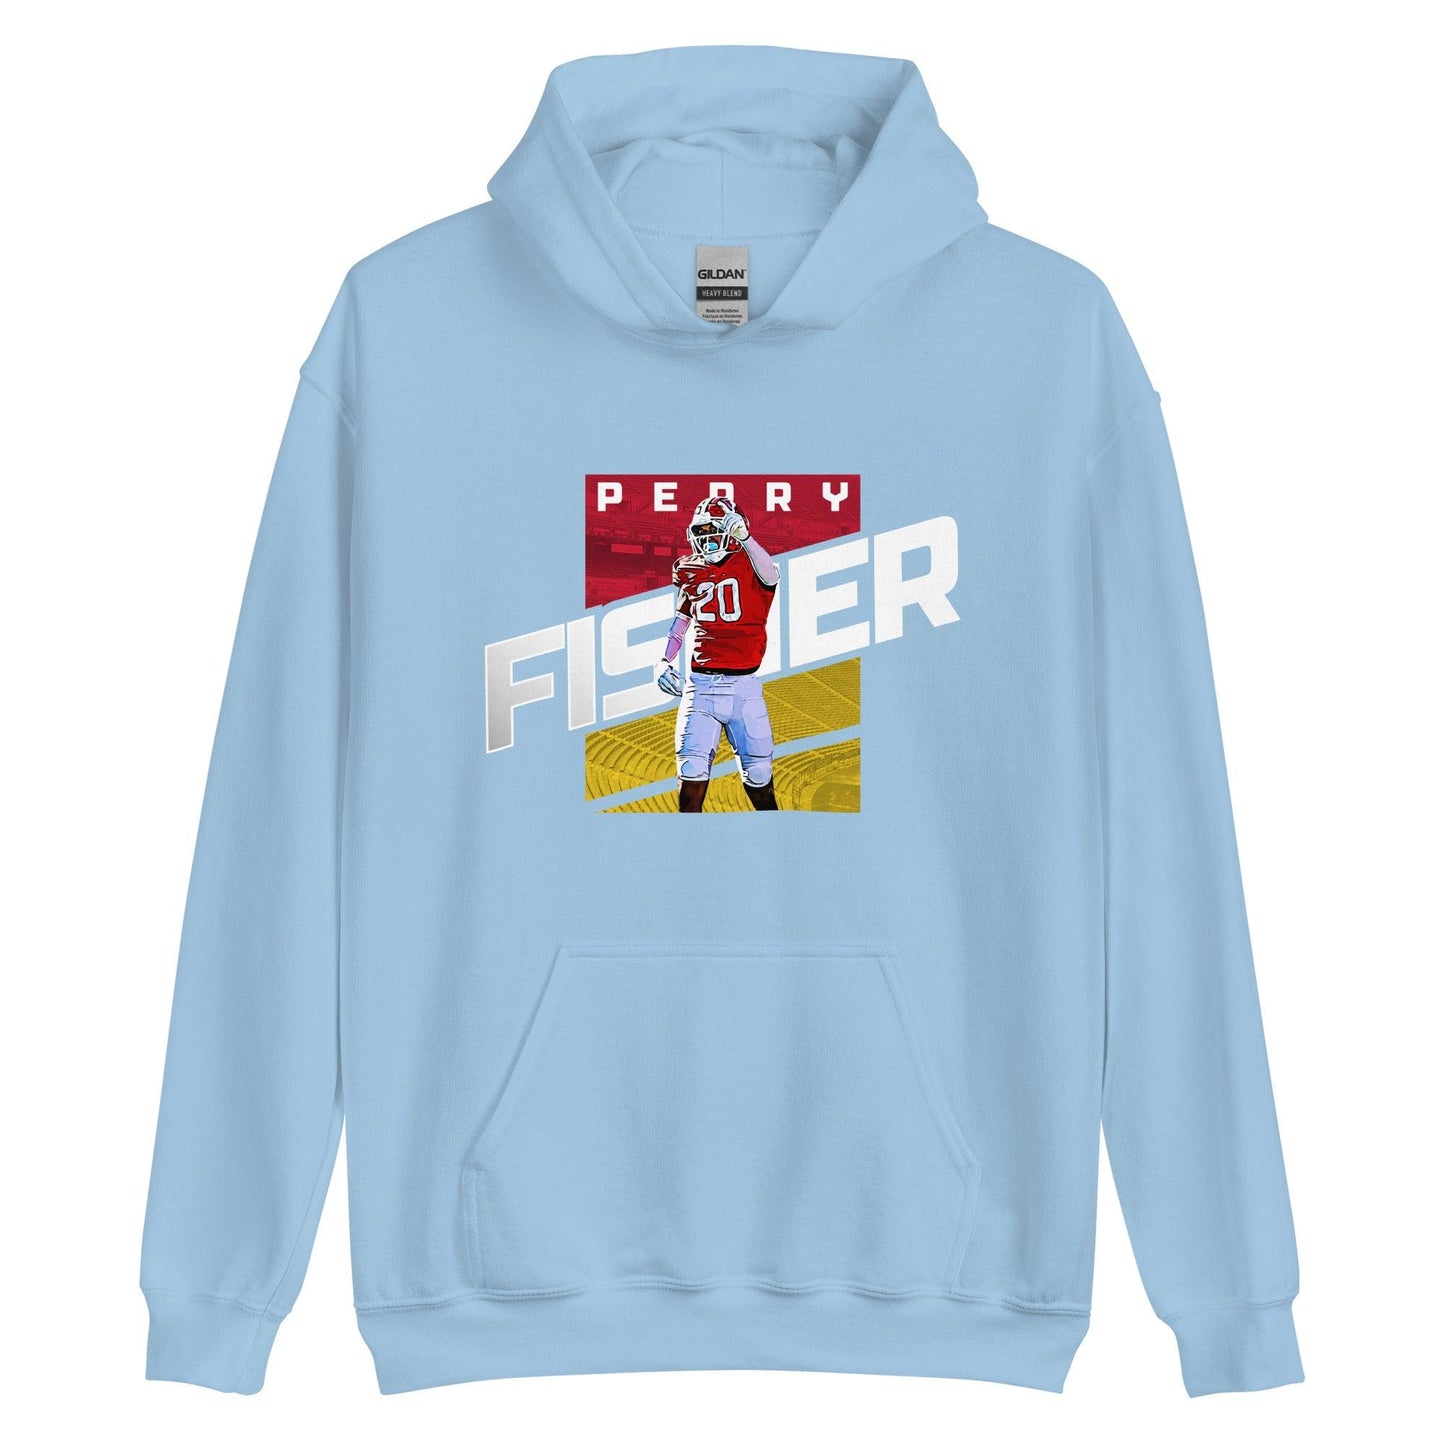 Perry Fisher "Gameday" Hoodie - Fan Arch